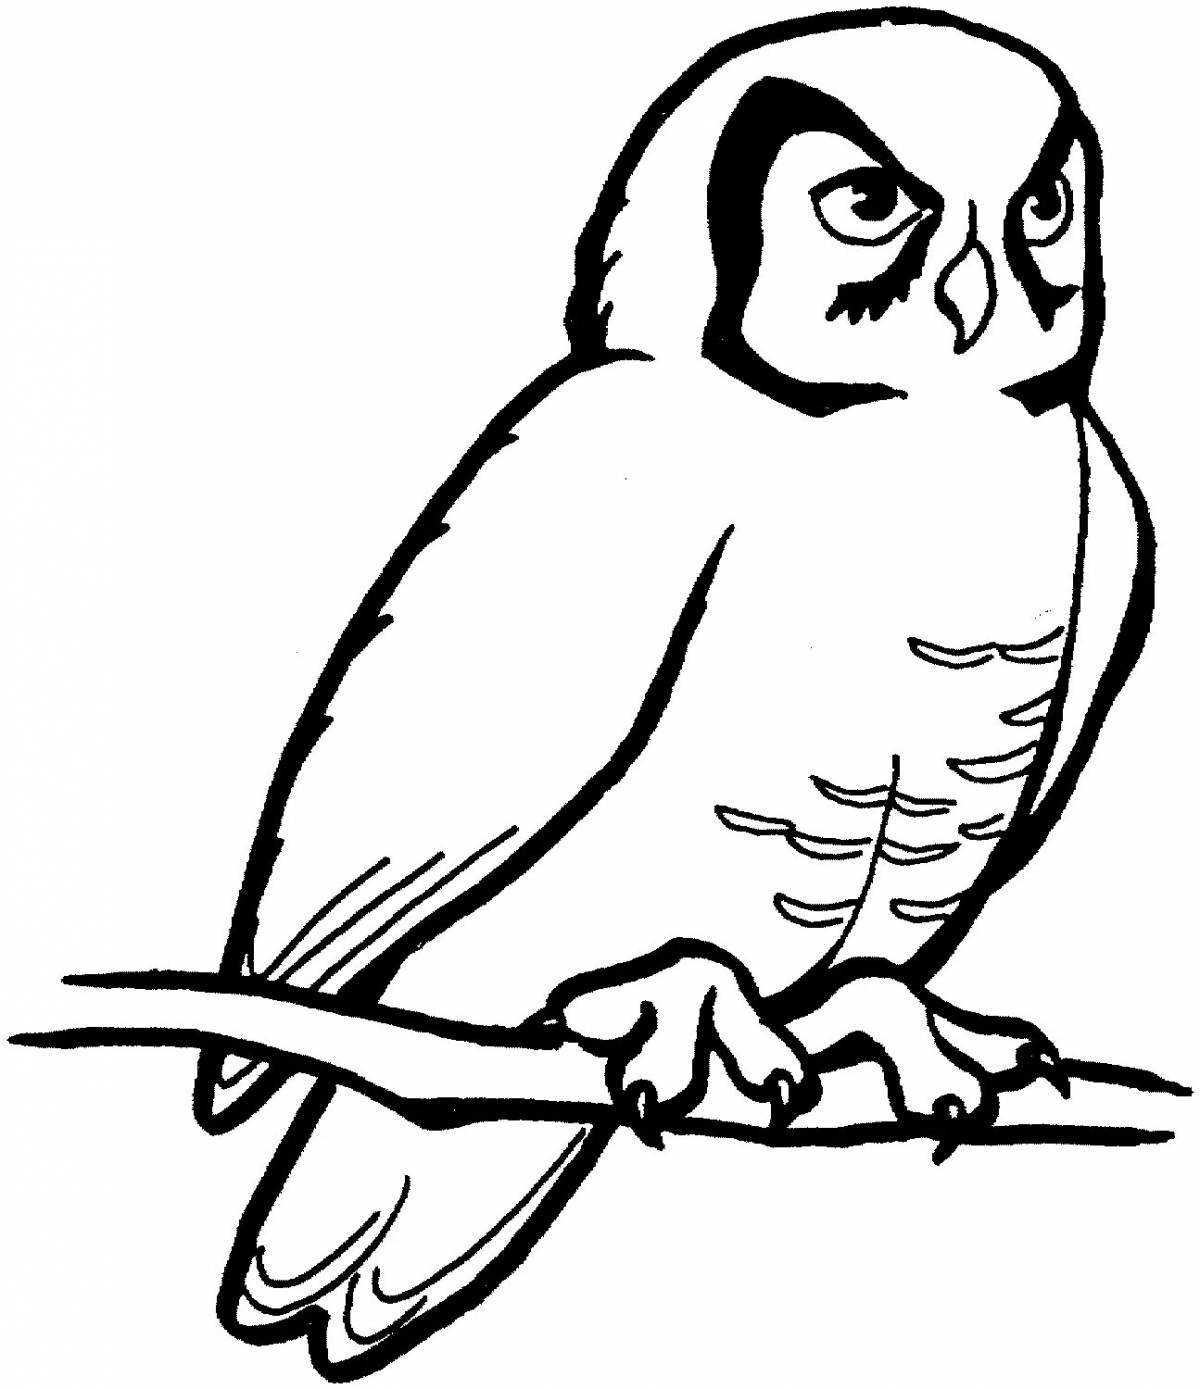 Royal white owl coloring page